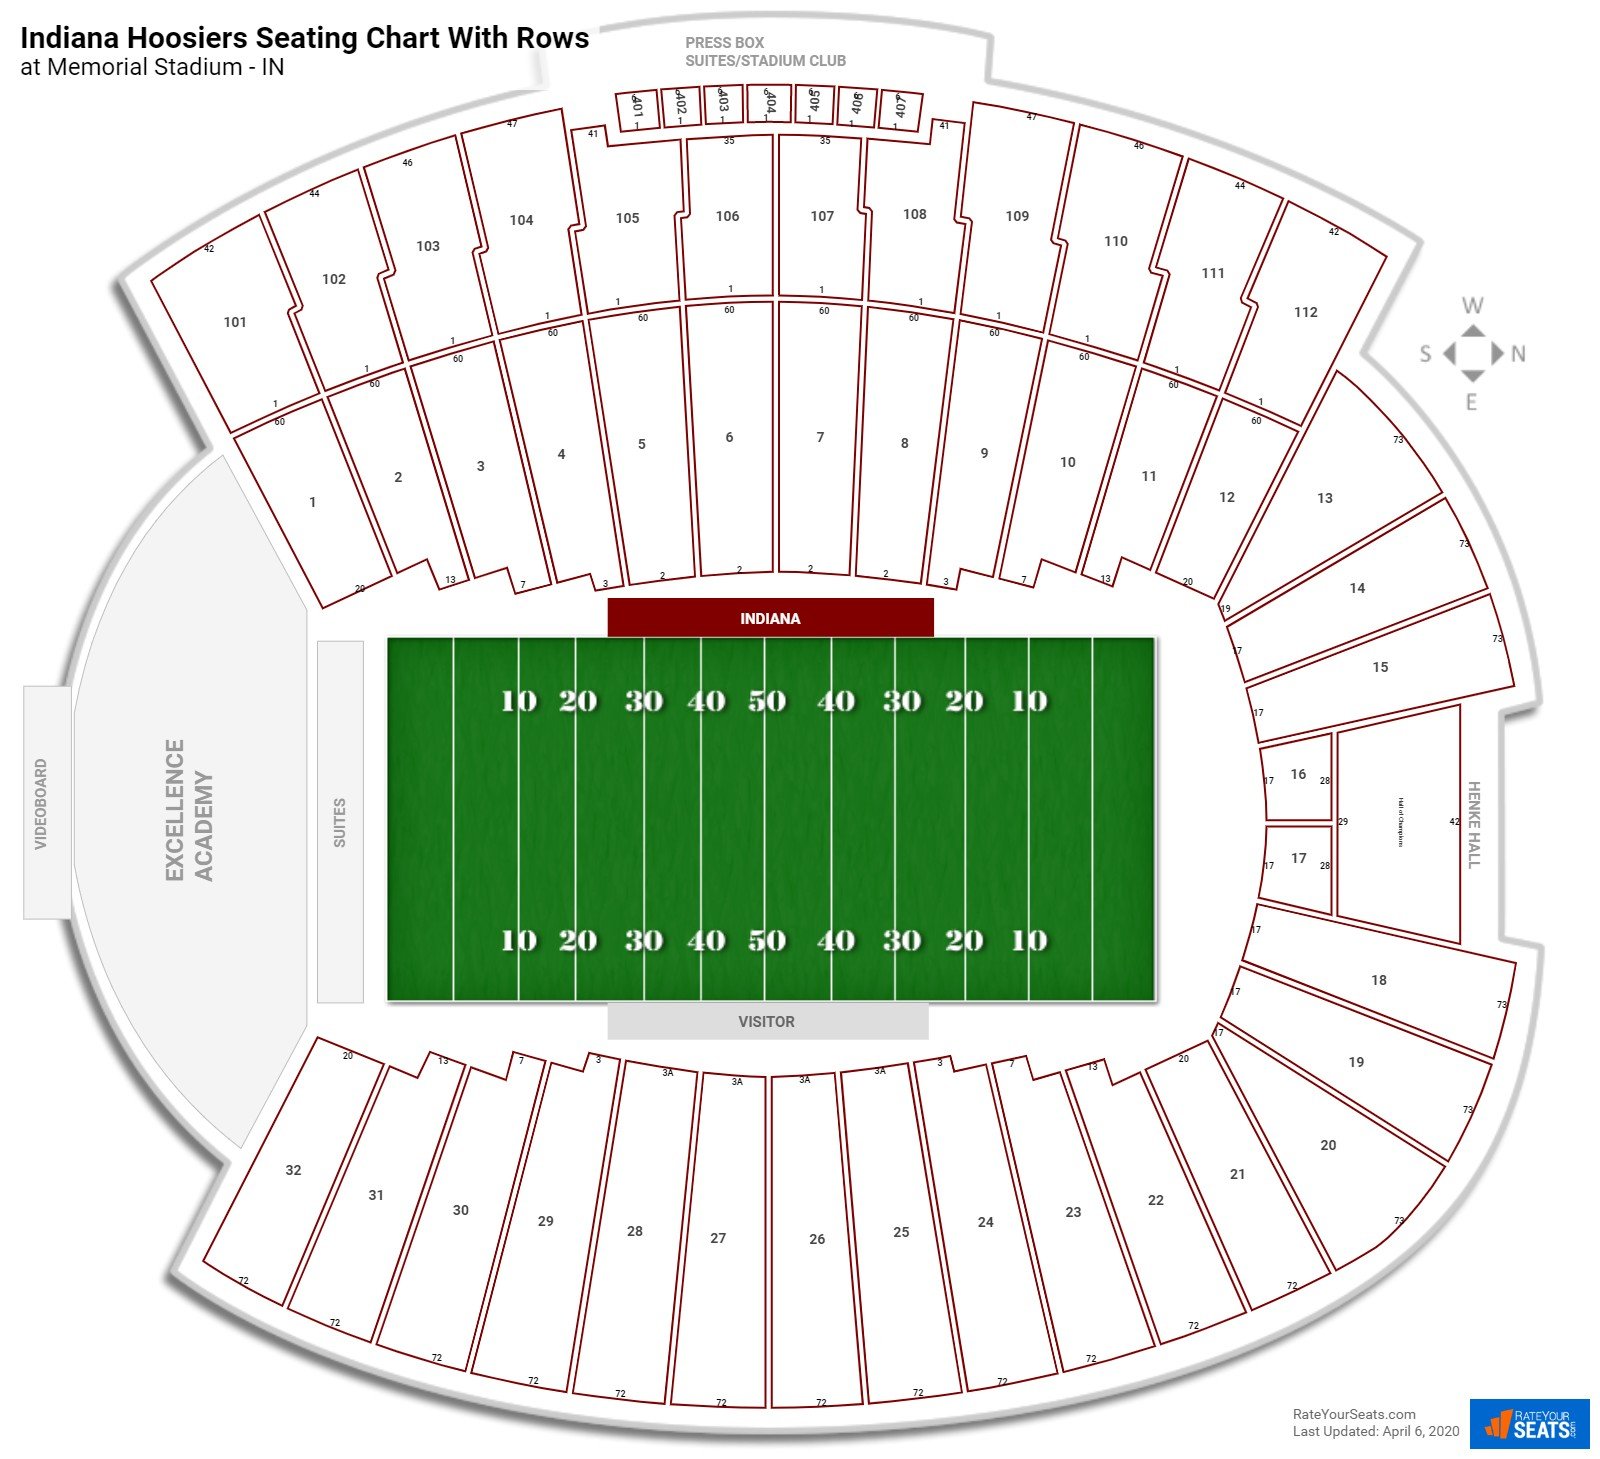 Memorial Stadium (Indiana) seating chart with row numbers